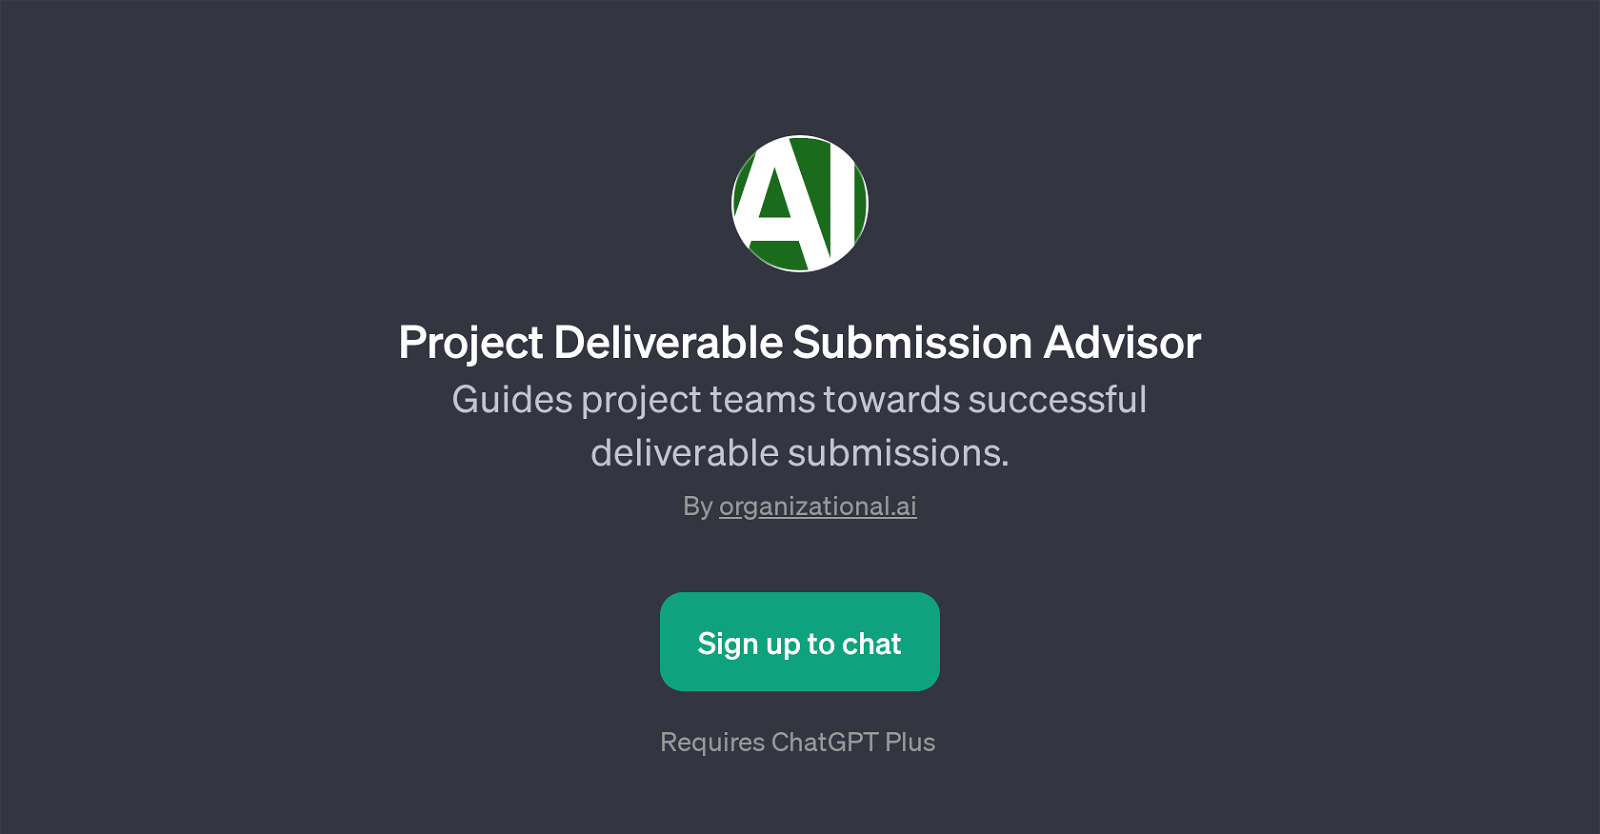 Project Deliverable Submission Advisor website